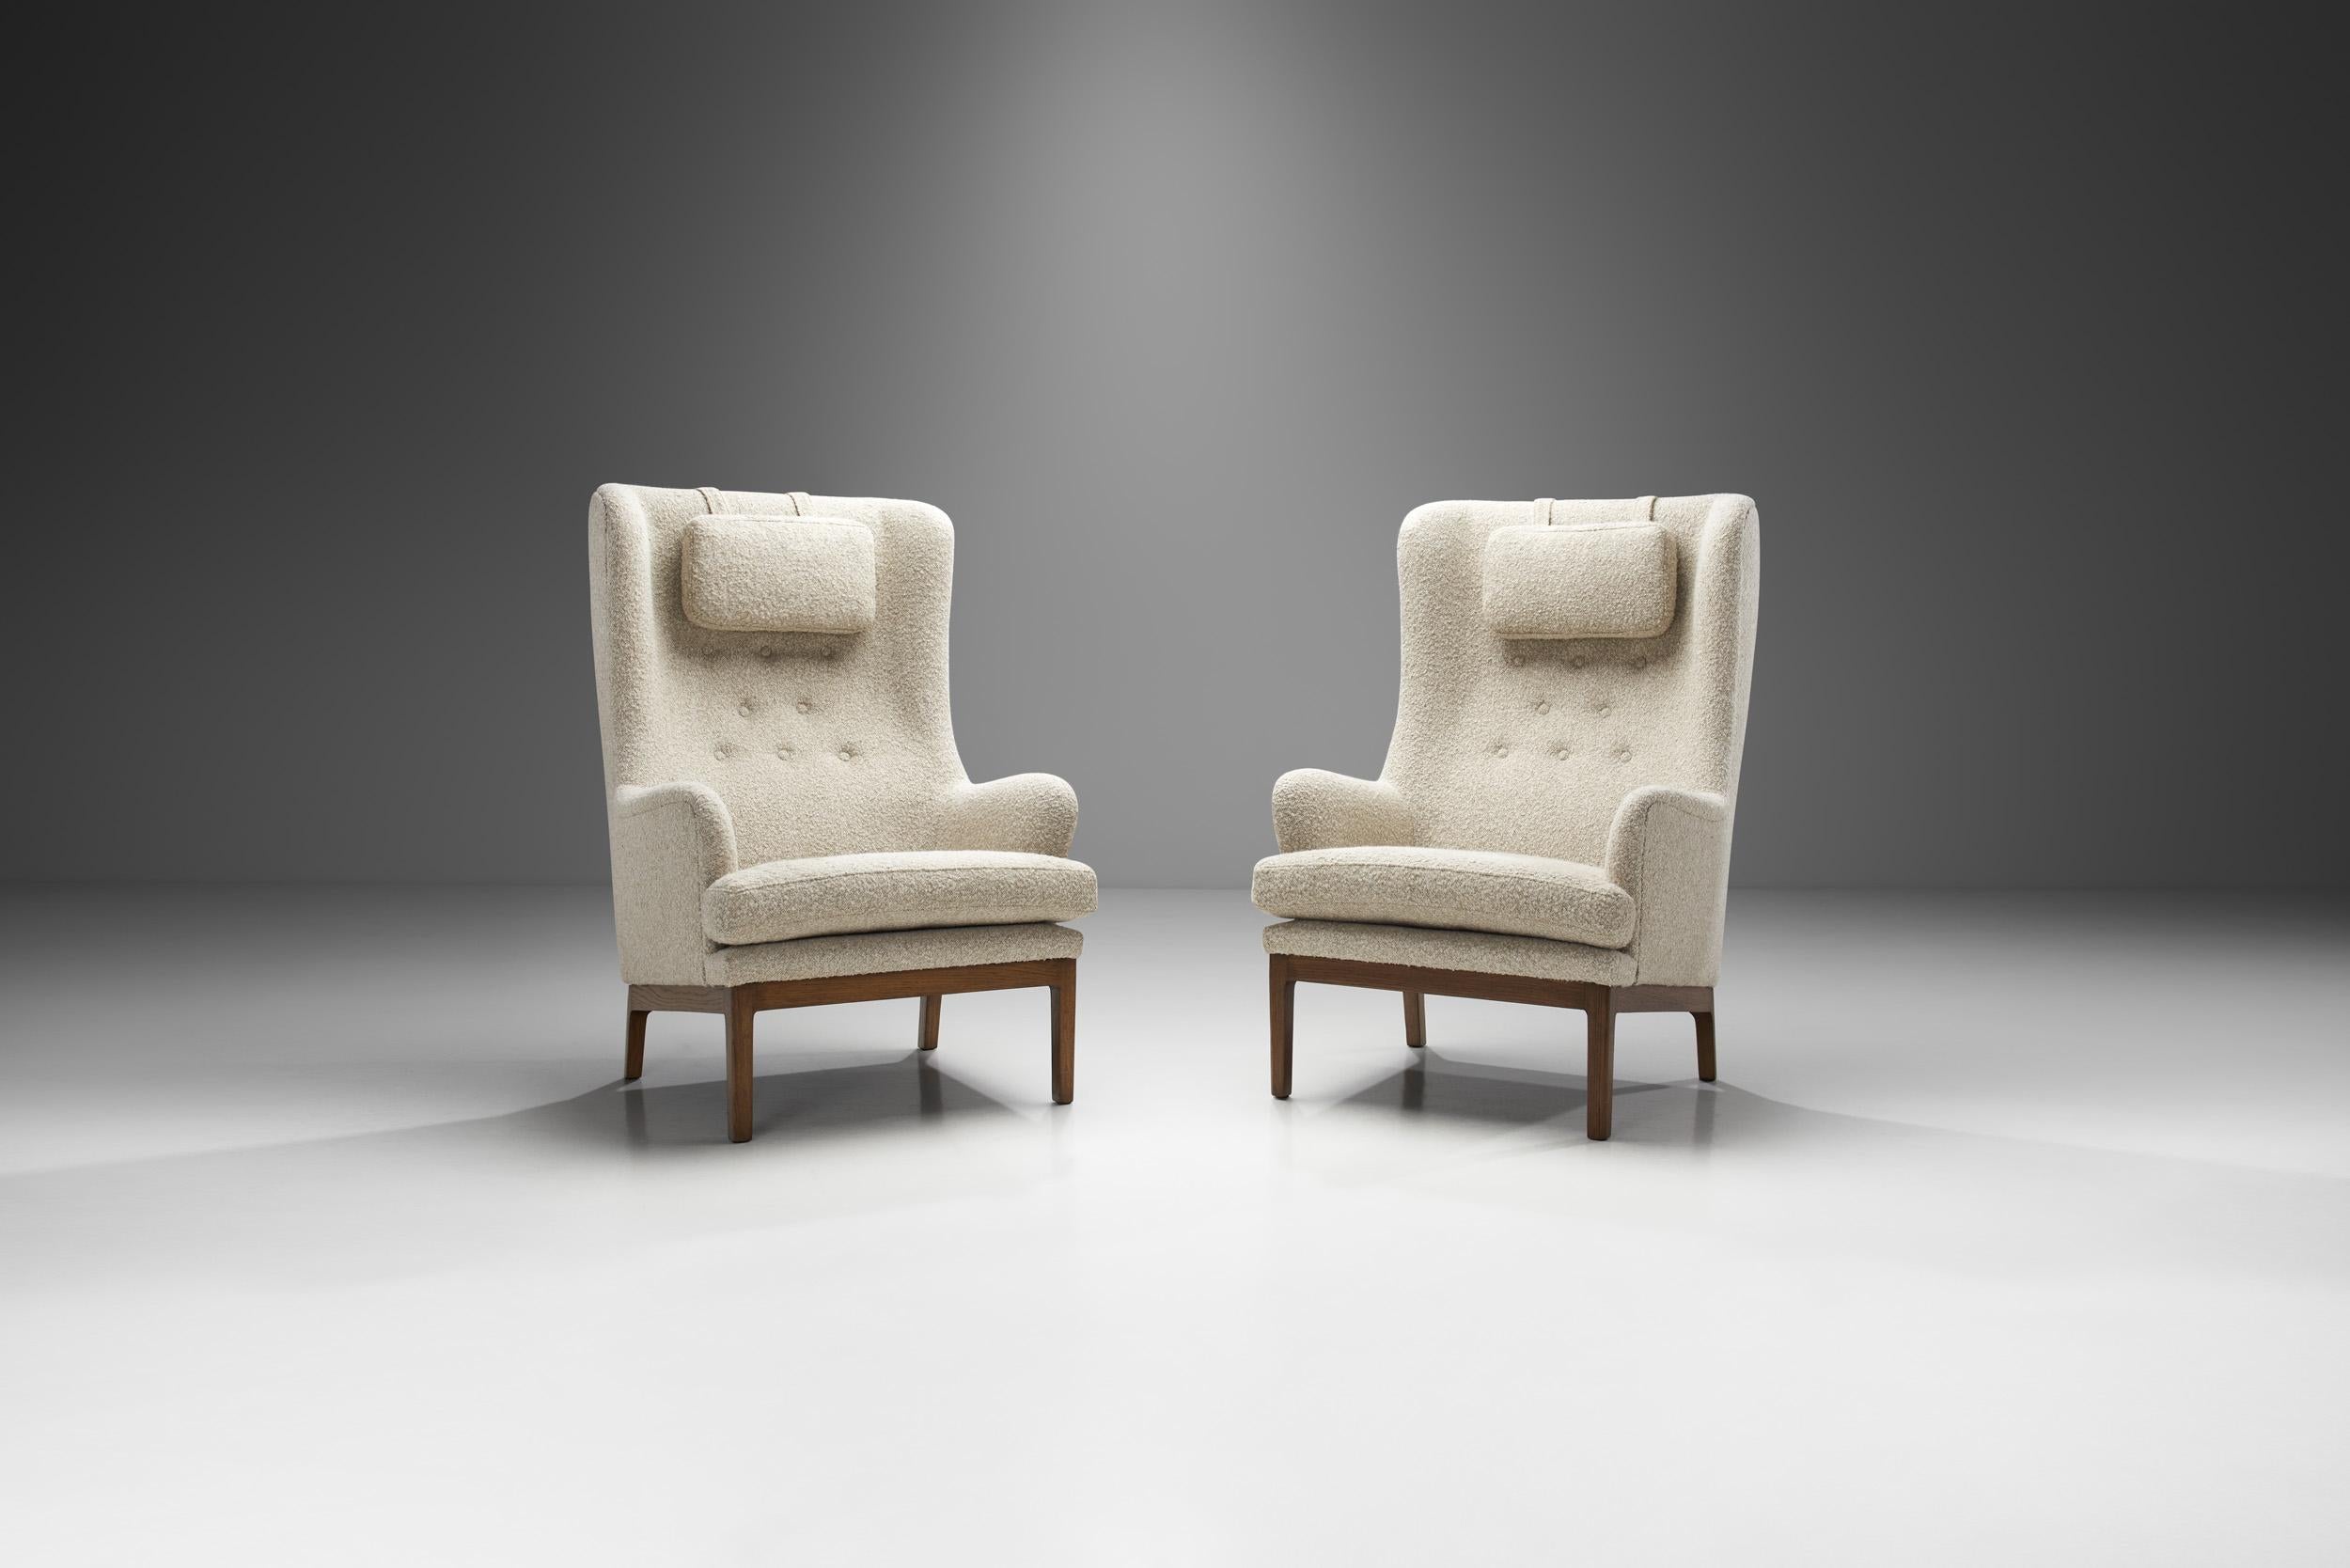 This pair of the “Krister” armchair model is a true Swedish design icon, and is among Arne Norell’s cosiest works. These high-back armchairs’ comfort is only rivalled by their stylishness and elegance. Arne Norell was a household name within the